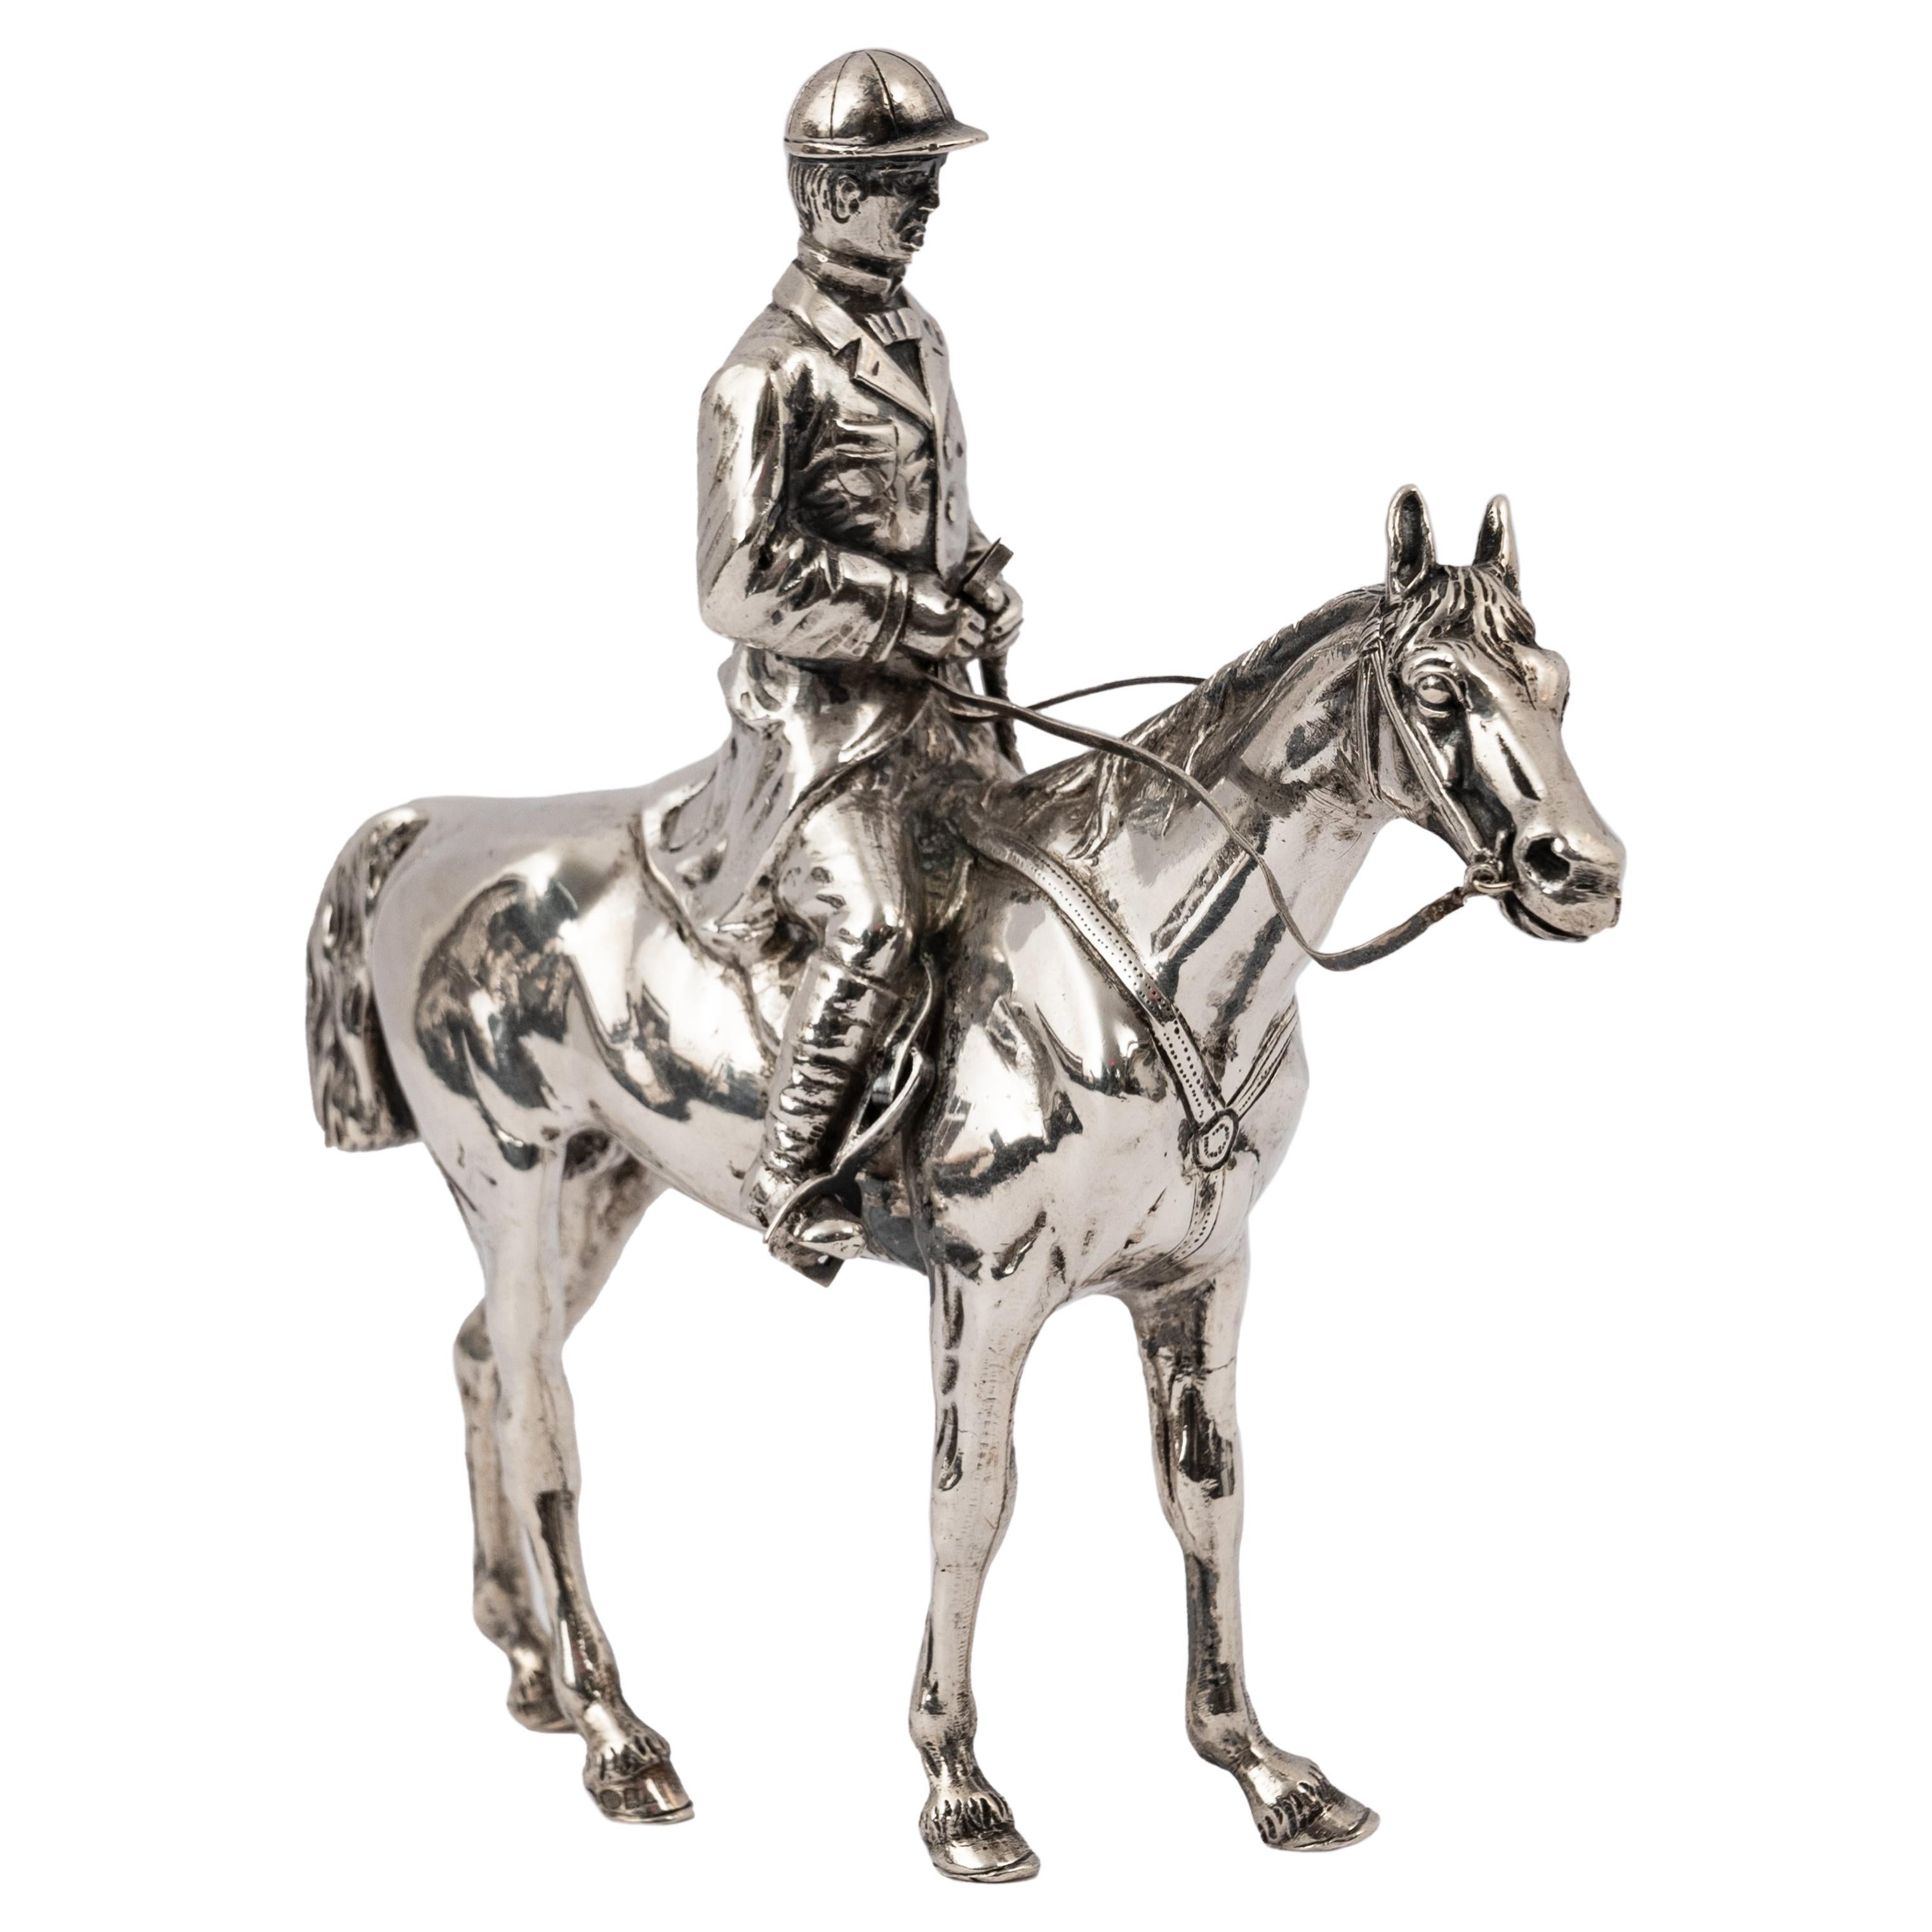 A good antique sterling silver equestrian horse & rider sculpture, circa 1920.
The statuette is very finely modeled as a rider and his horse and most likely engaged in dressage, the rider is dressed in traditional English riding attire. Both the